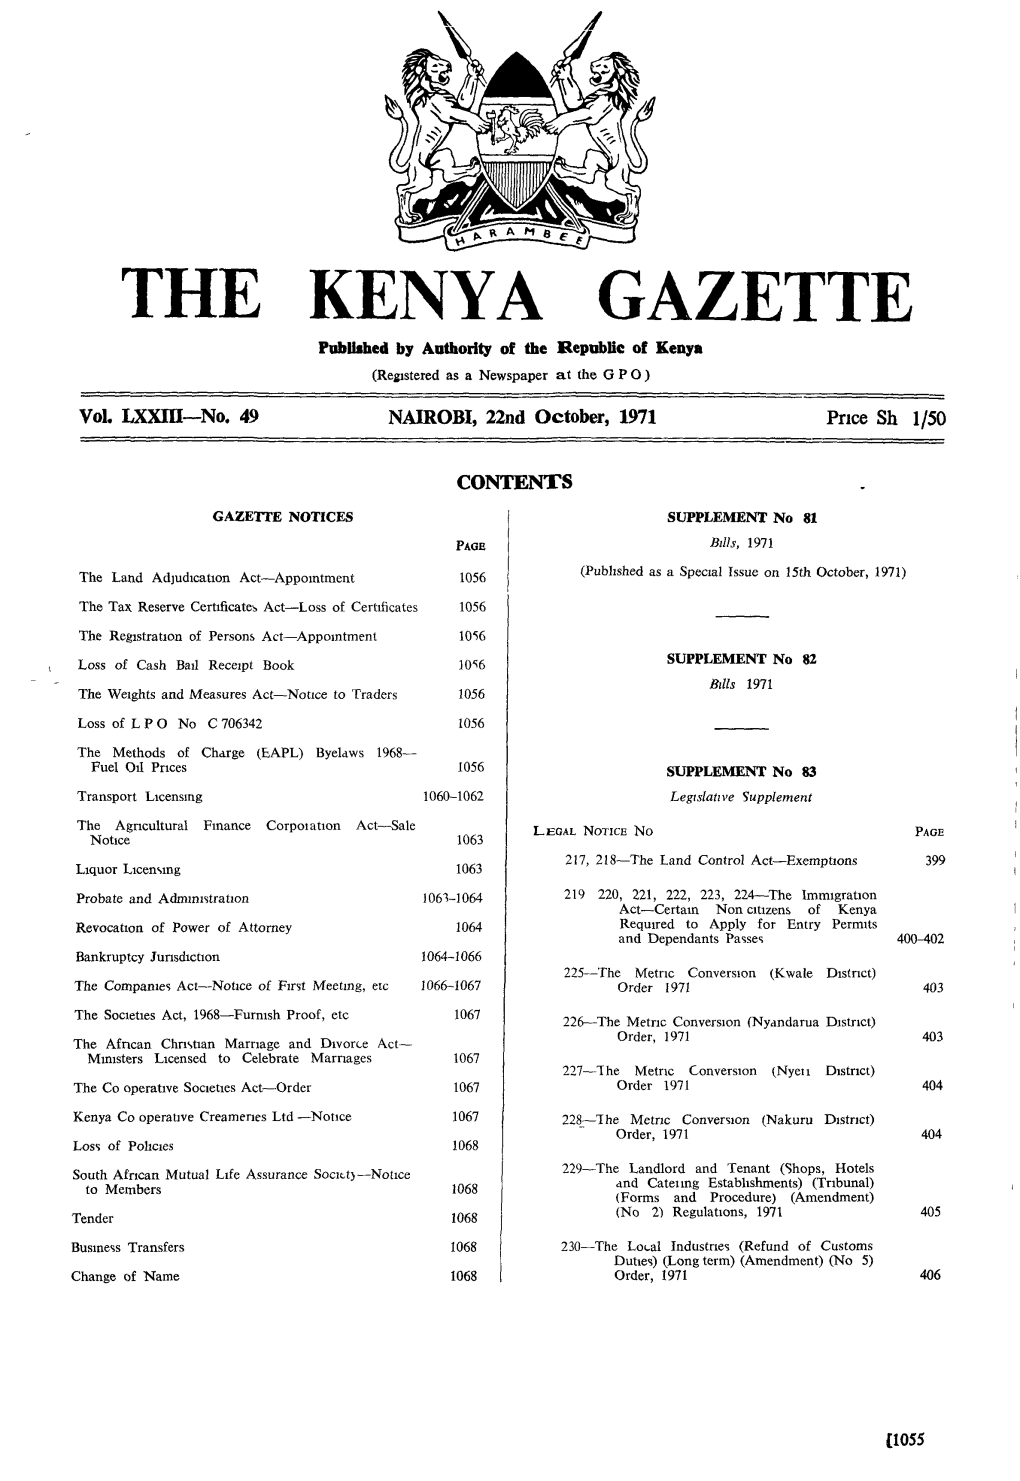 THE KENYA GAZETTE Published by Authority of the Republic of Kenya (Registered As a Newspaper at the G P 0)